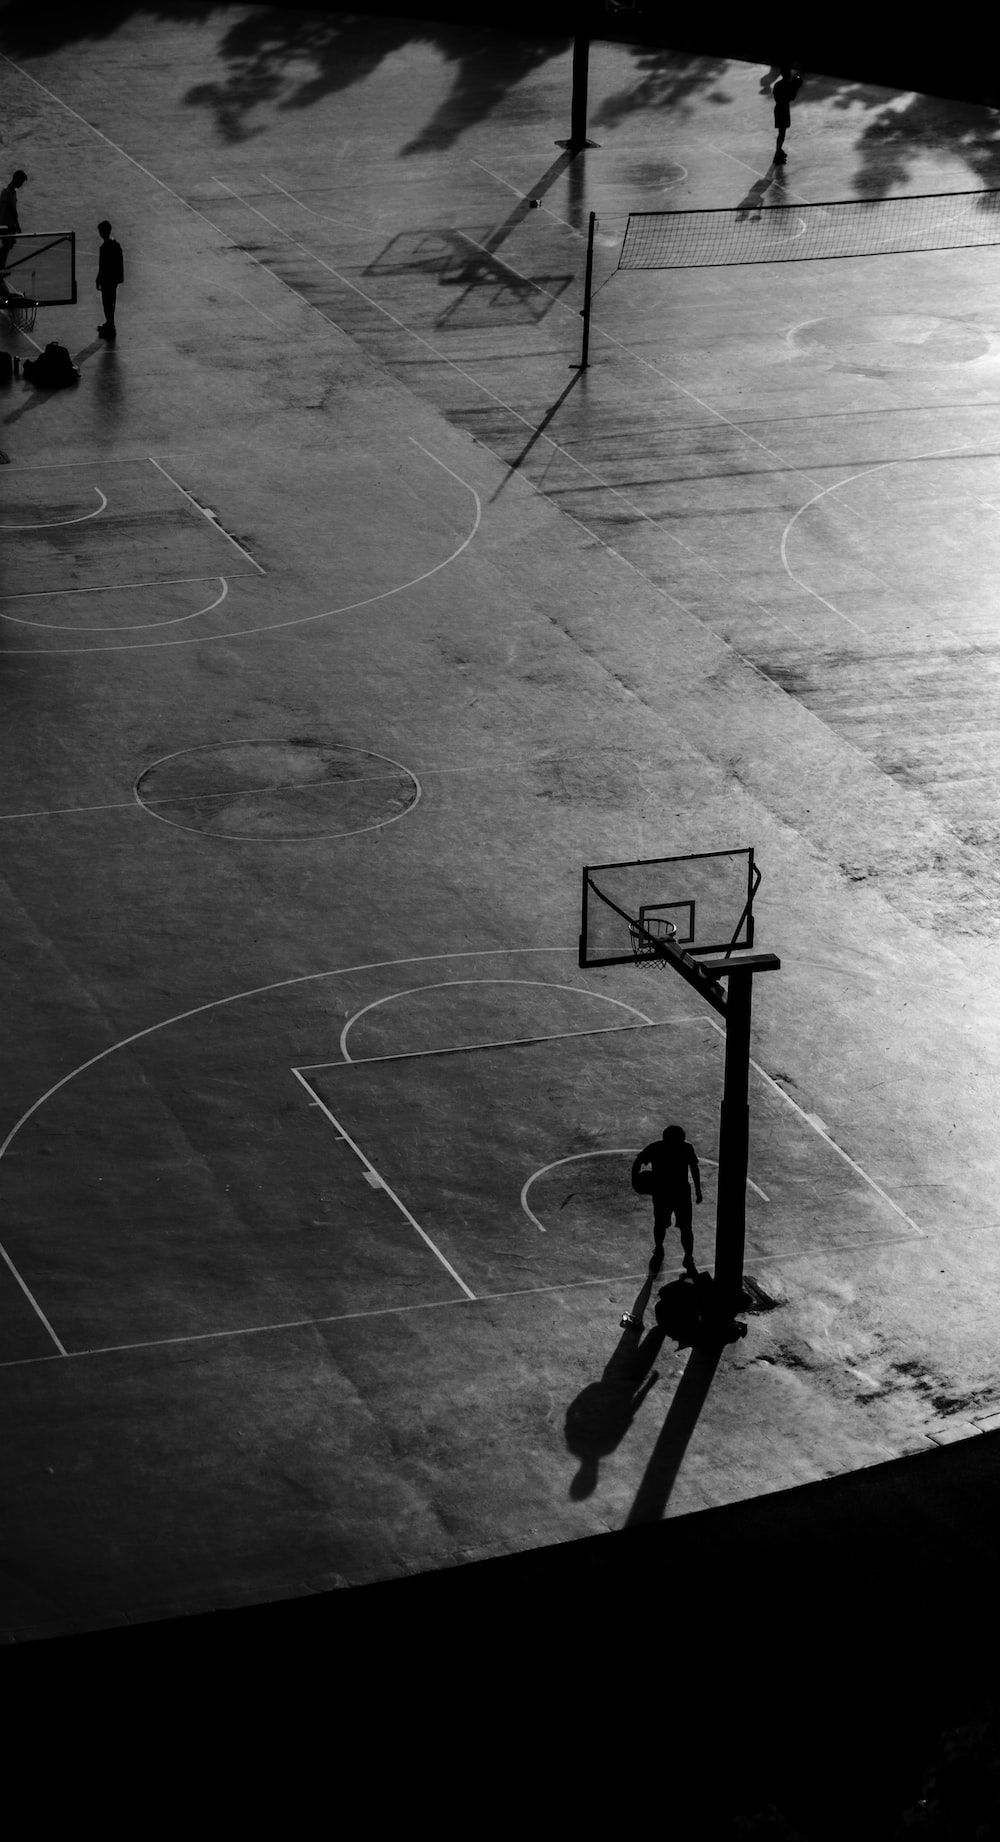 A person playing basketball on a court. - Basketball